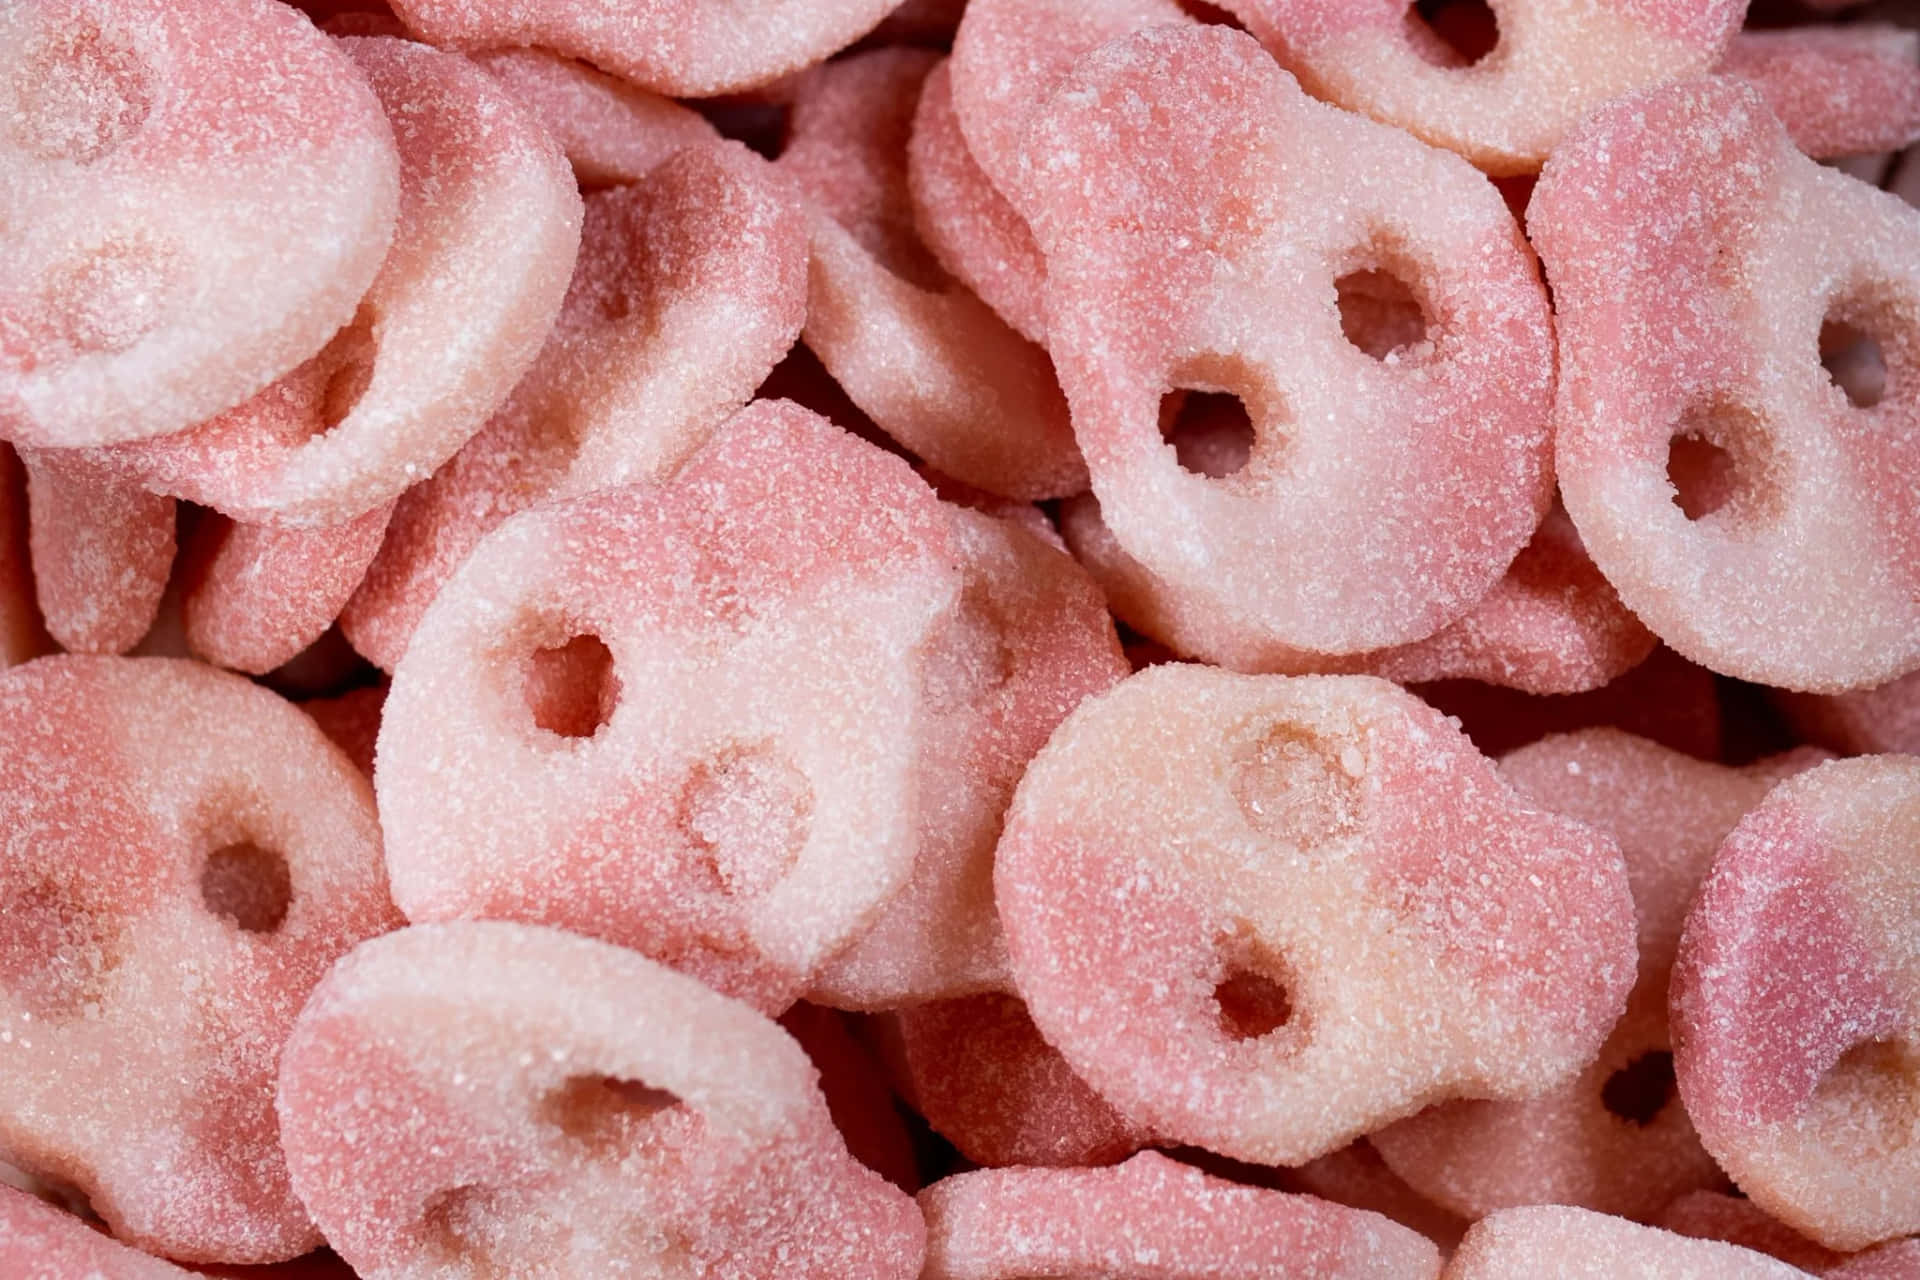 Close-up Image Of Pink Candy Wallpaper